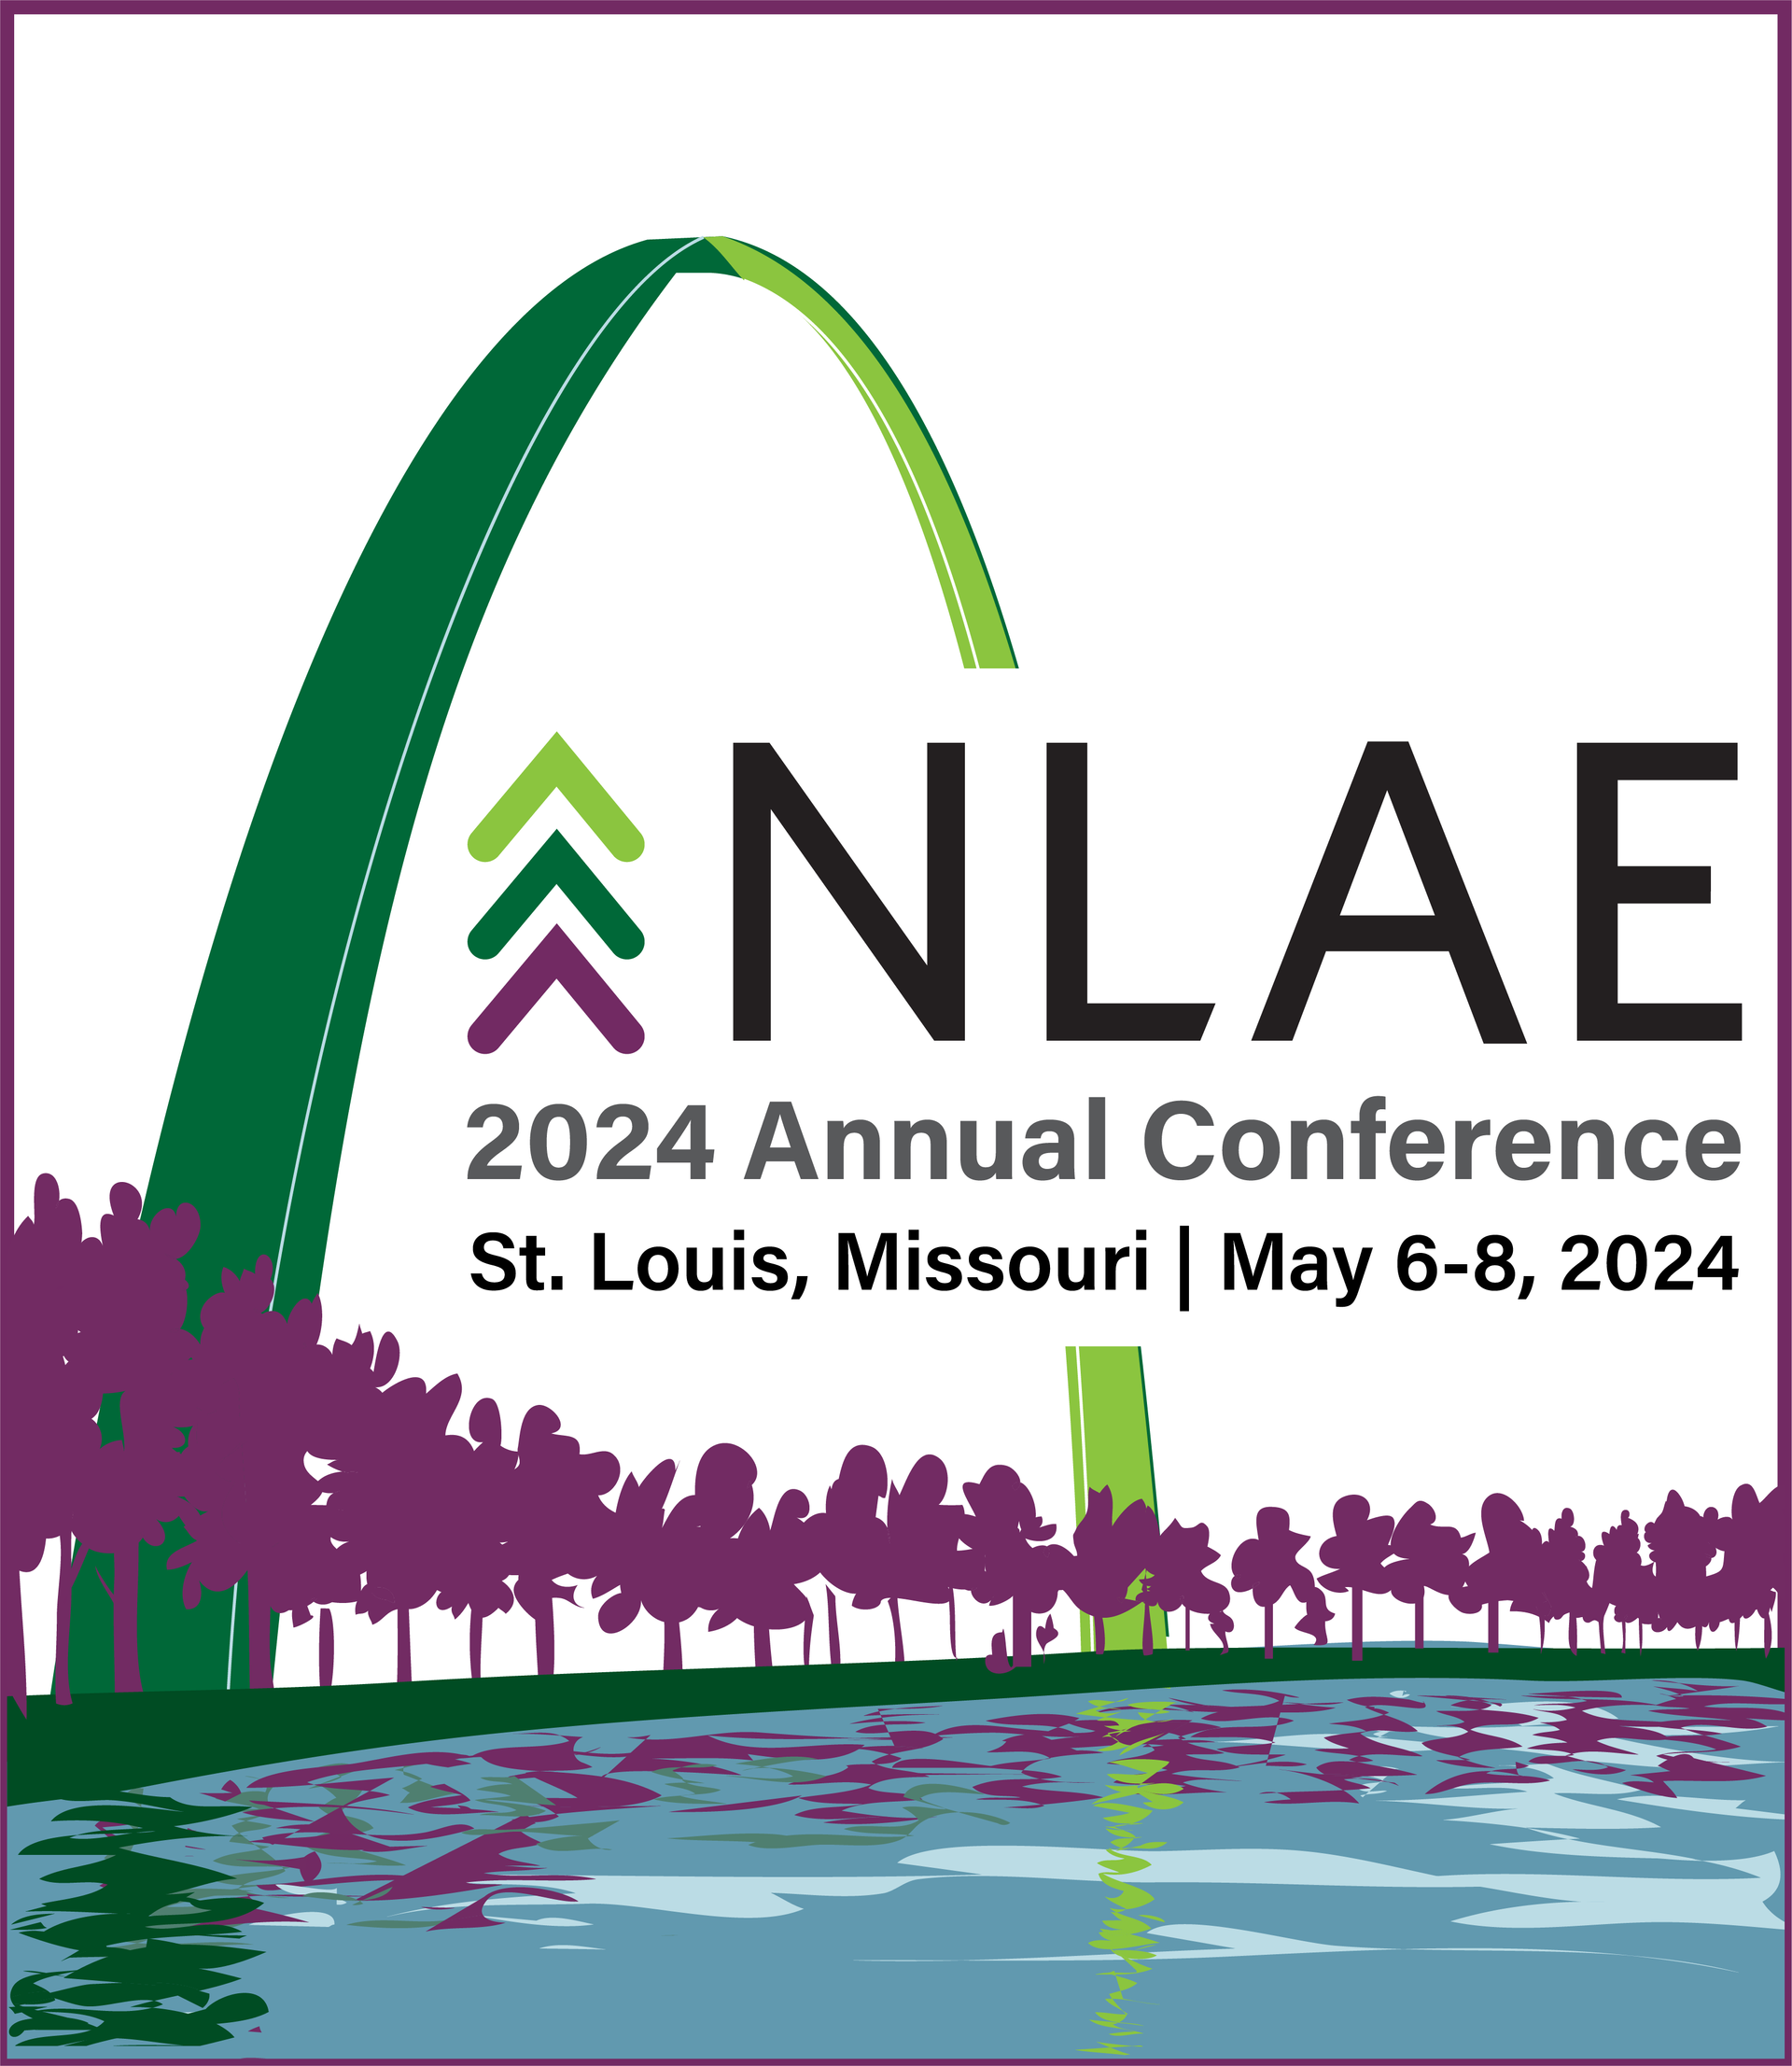 NLAE 2024 Annual Conference